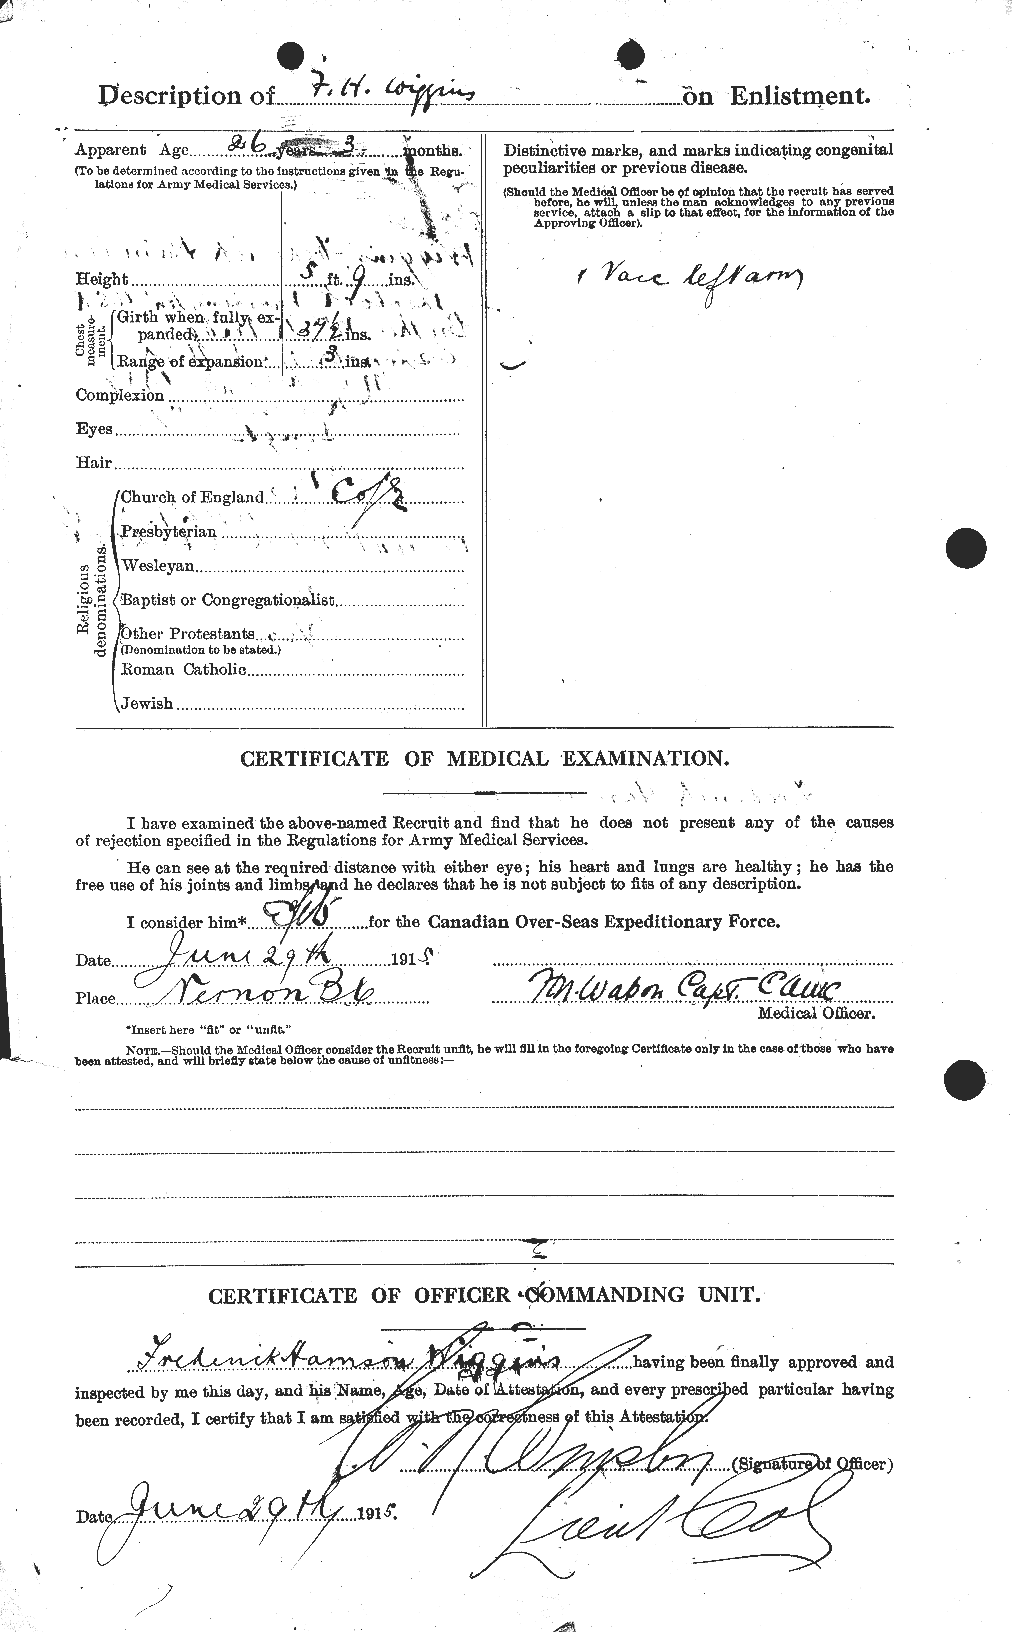 Personnel Records of the First World War - CEF 674620b